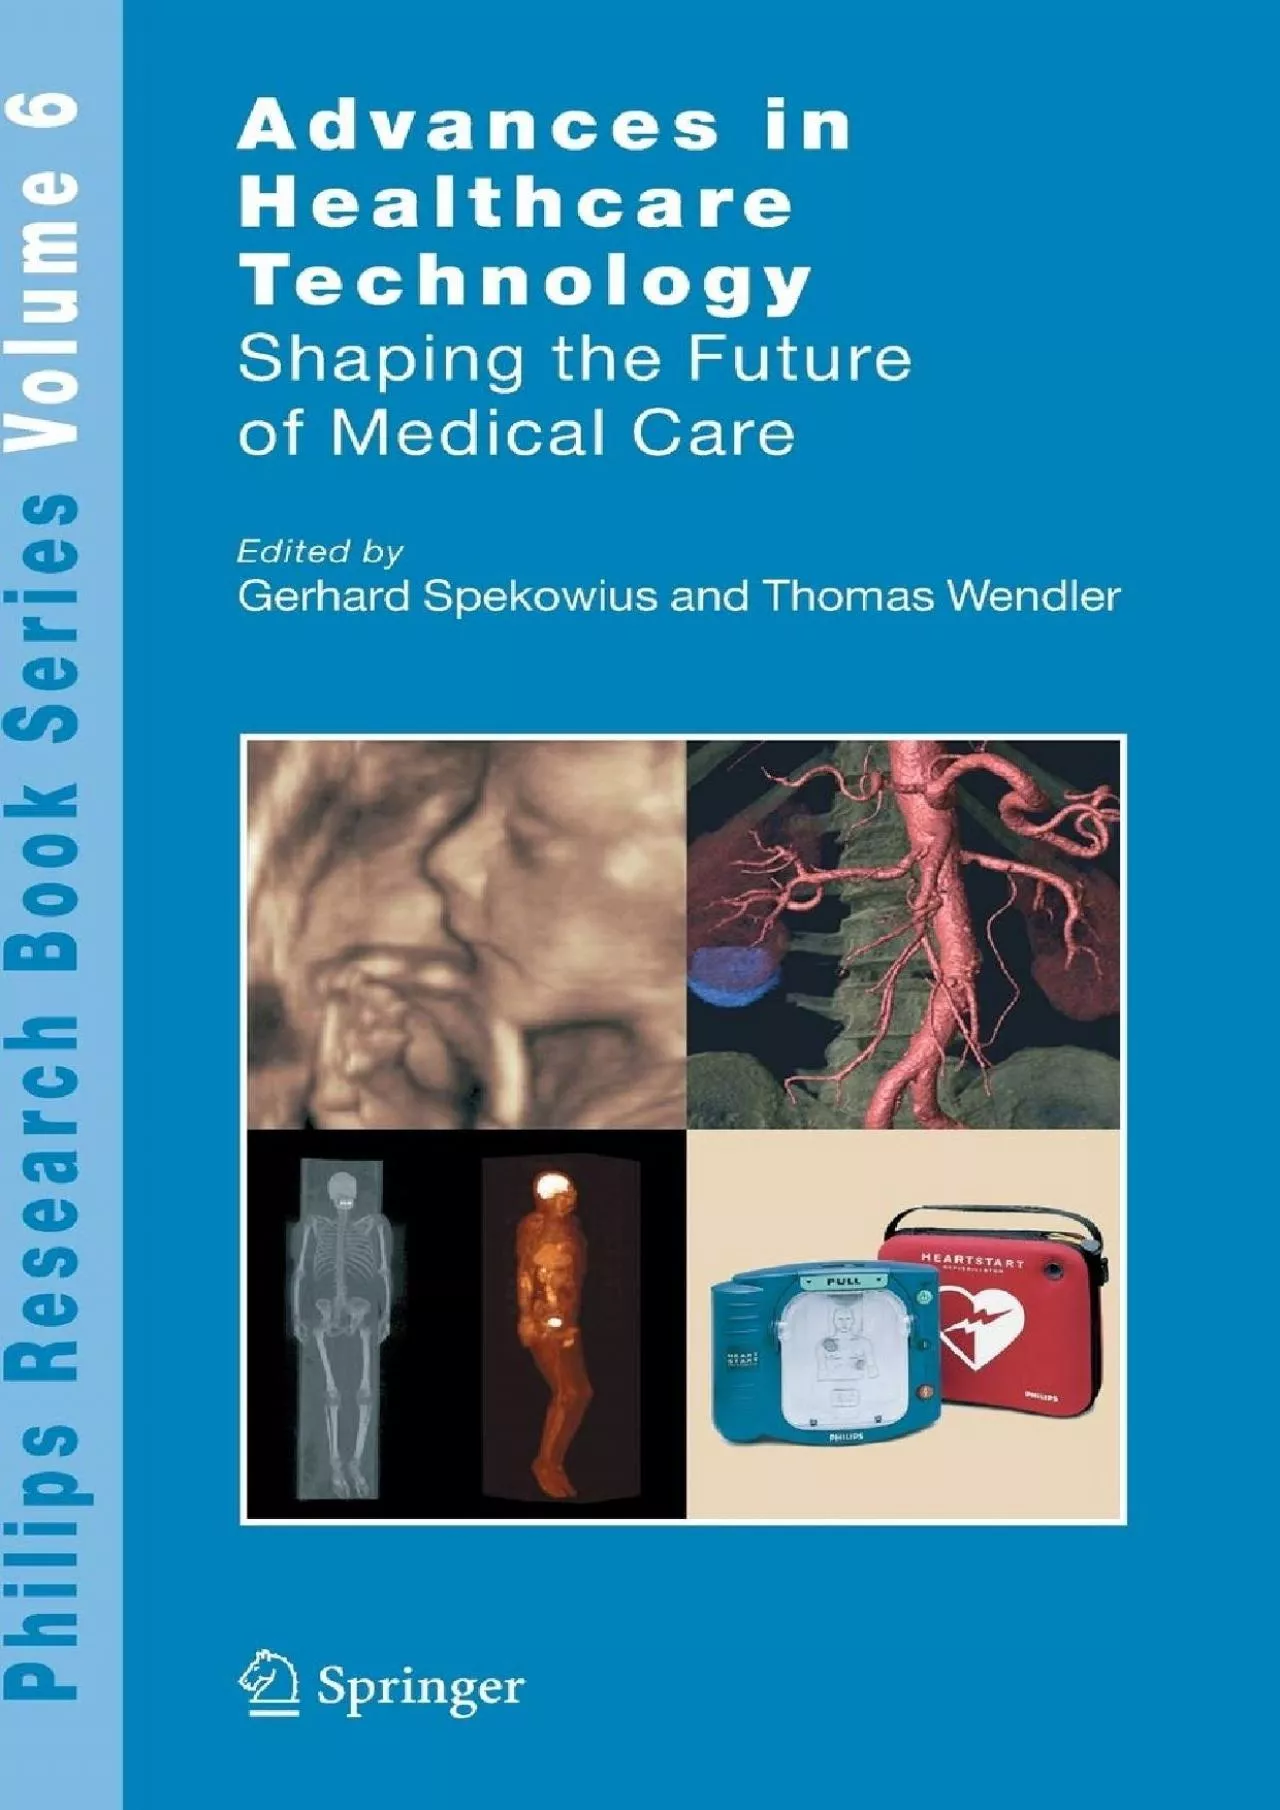 (READ)-Advances in Healthcare Technology: Shaping the Future of Medical Care (Philips